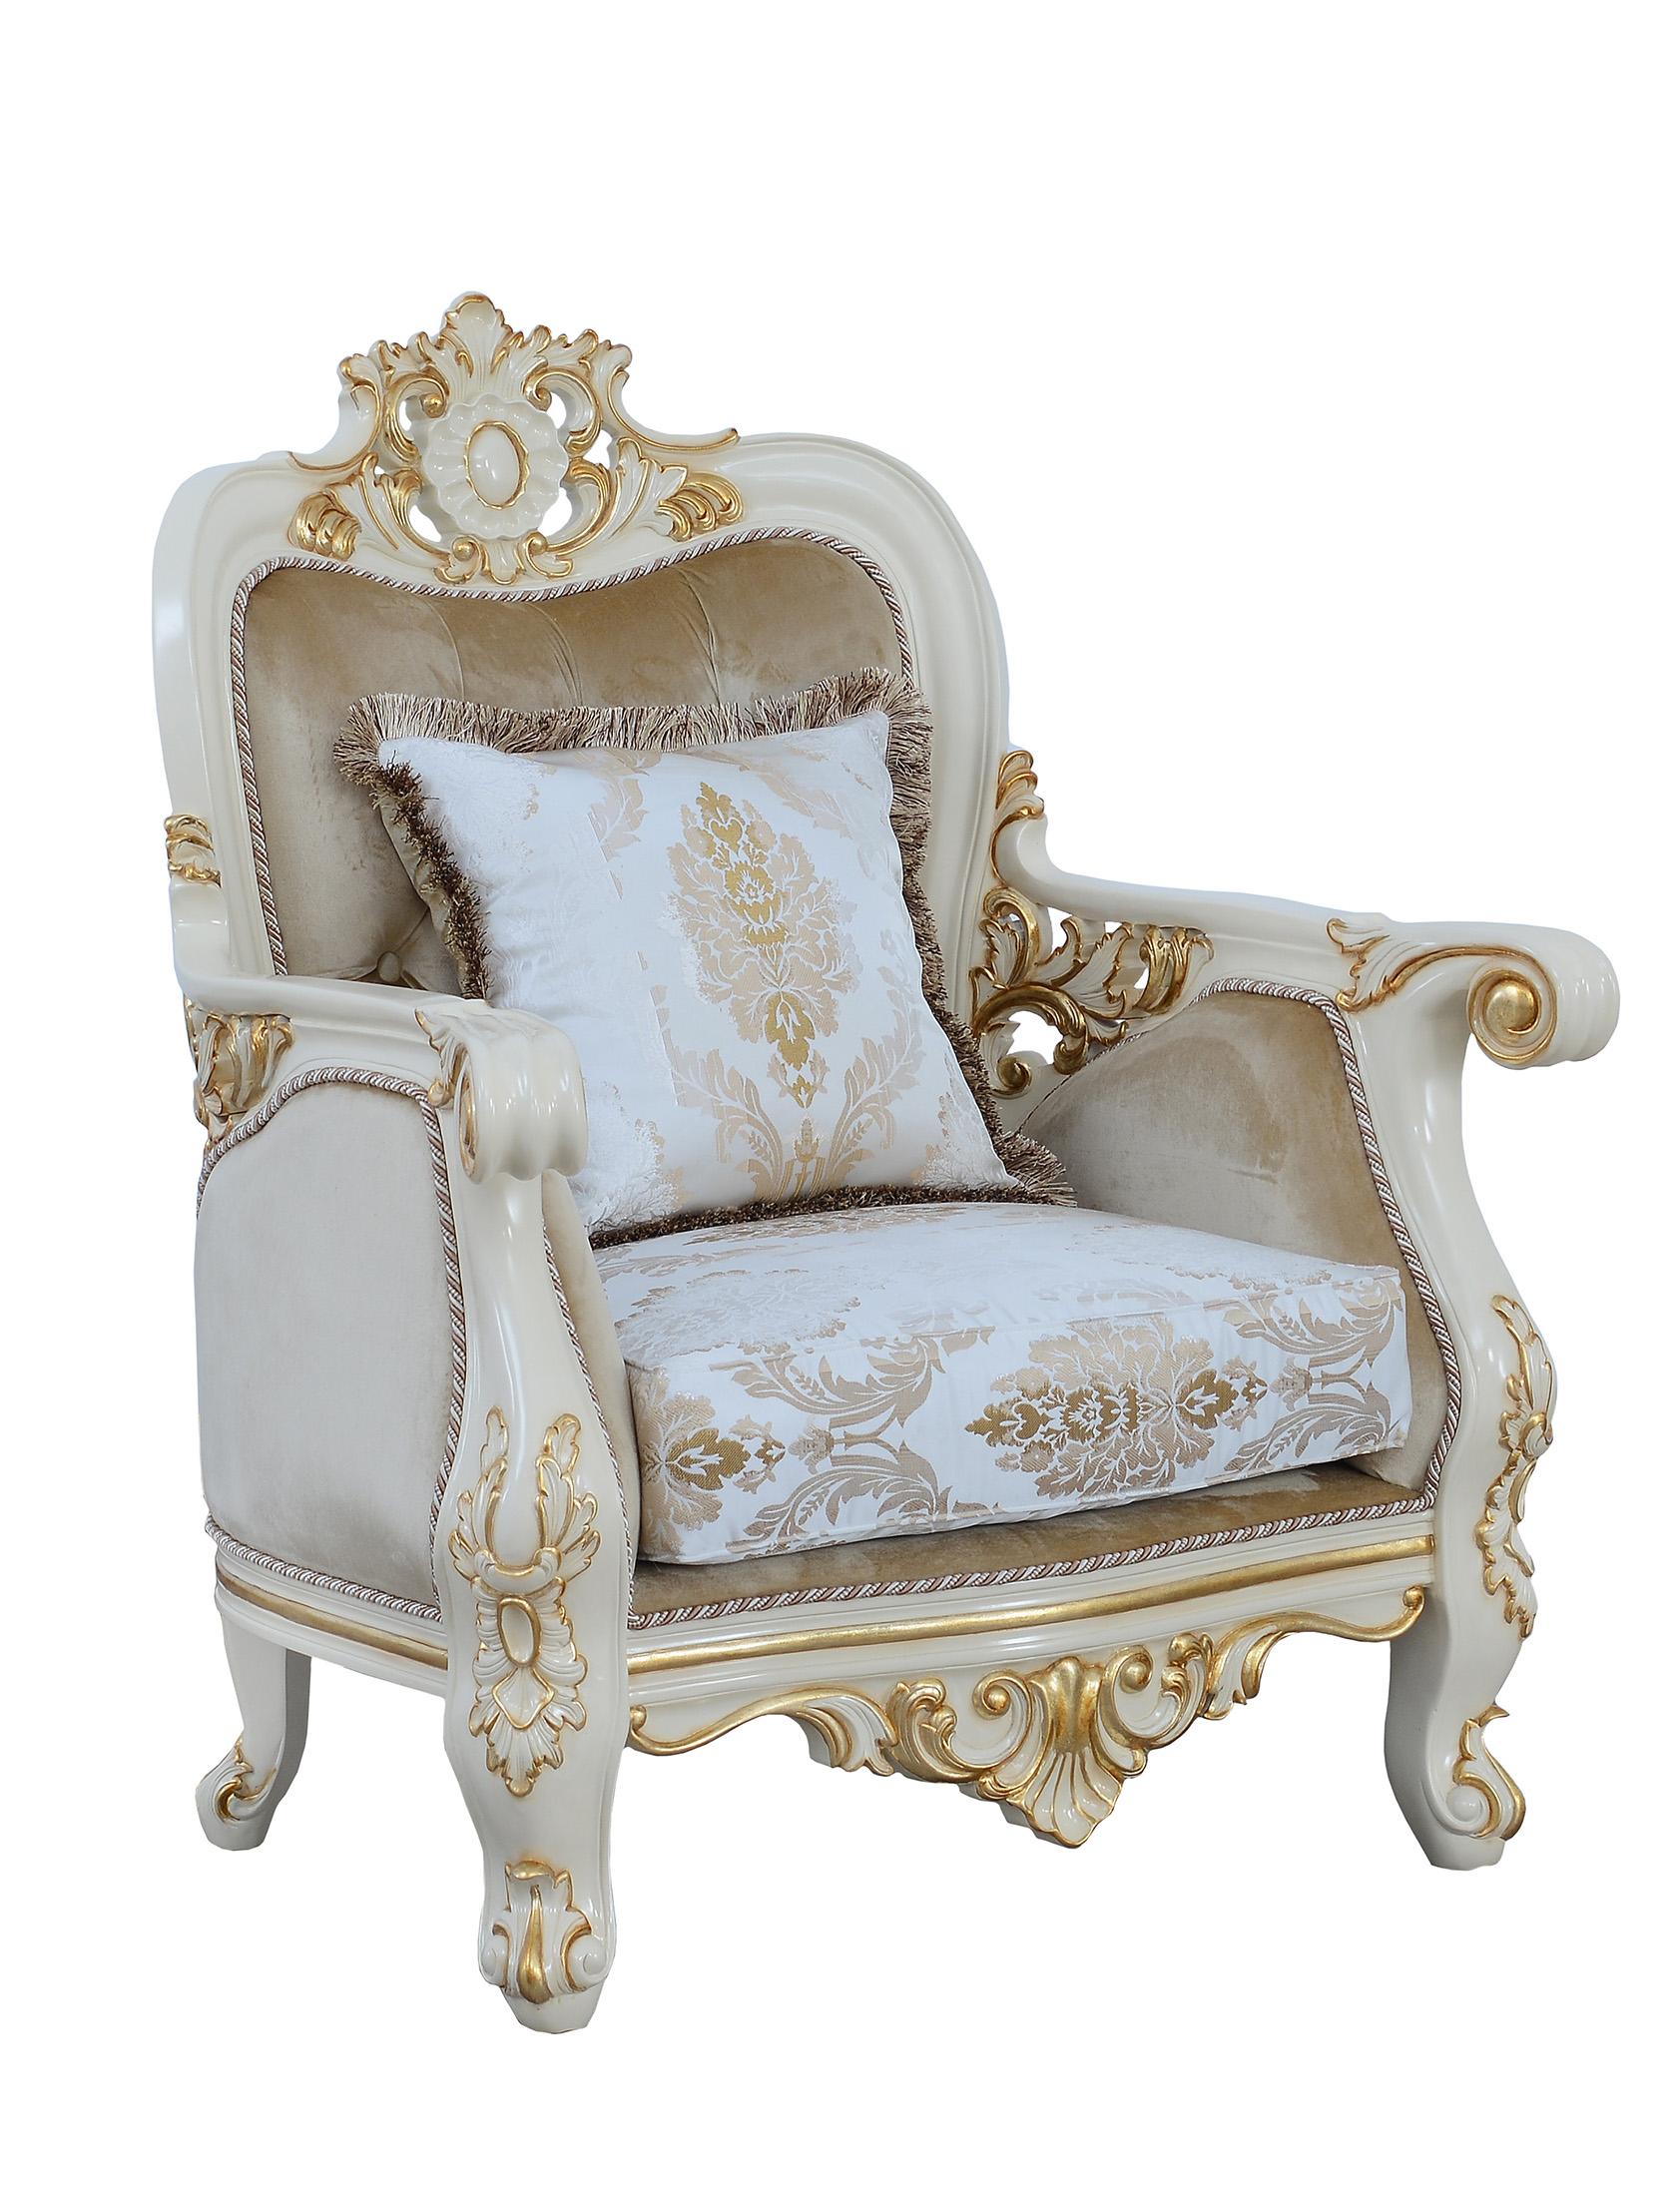 Classic, Traditional Arm Chair BELLAGIO 30017-C in Antique, Gold, Beige Fabric